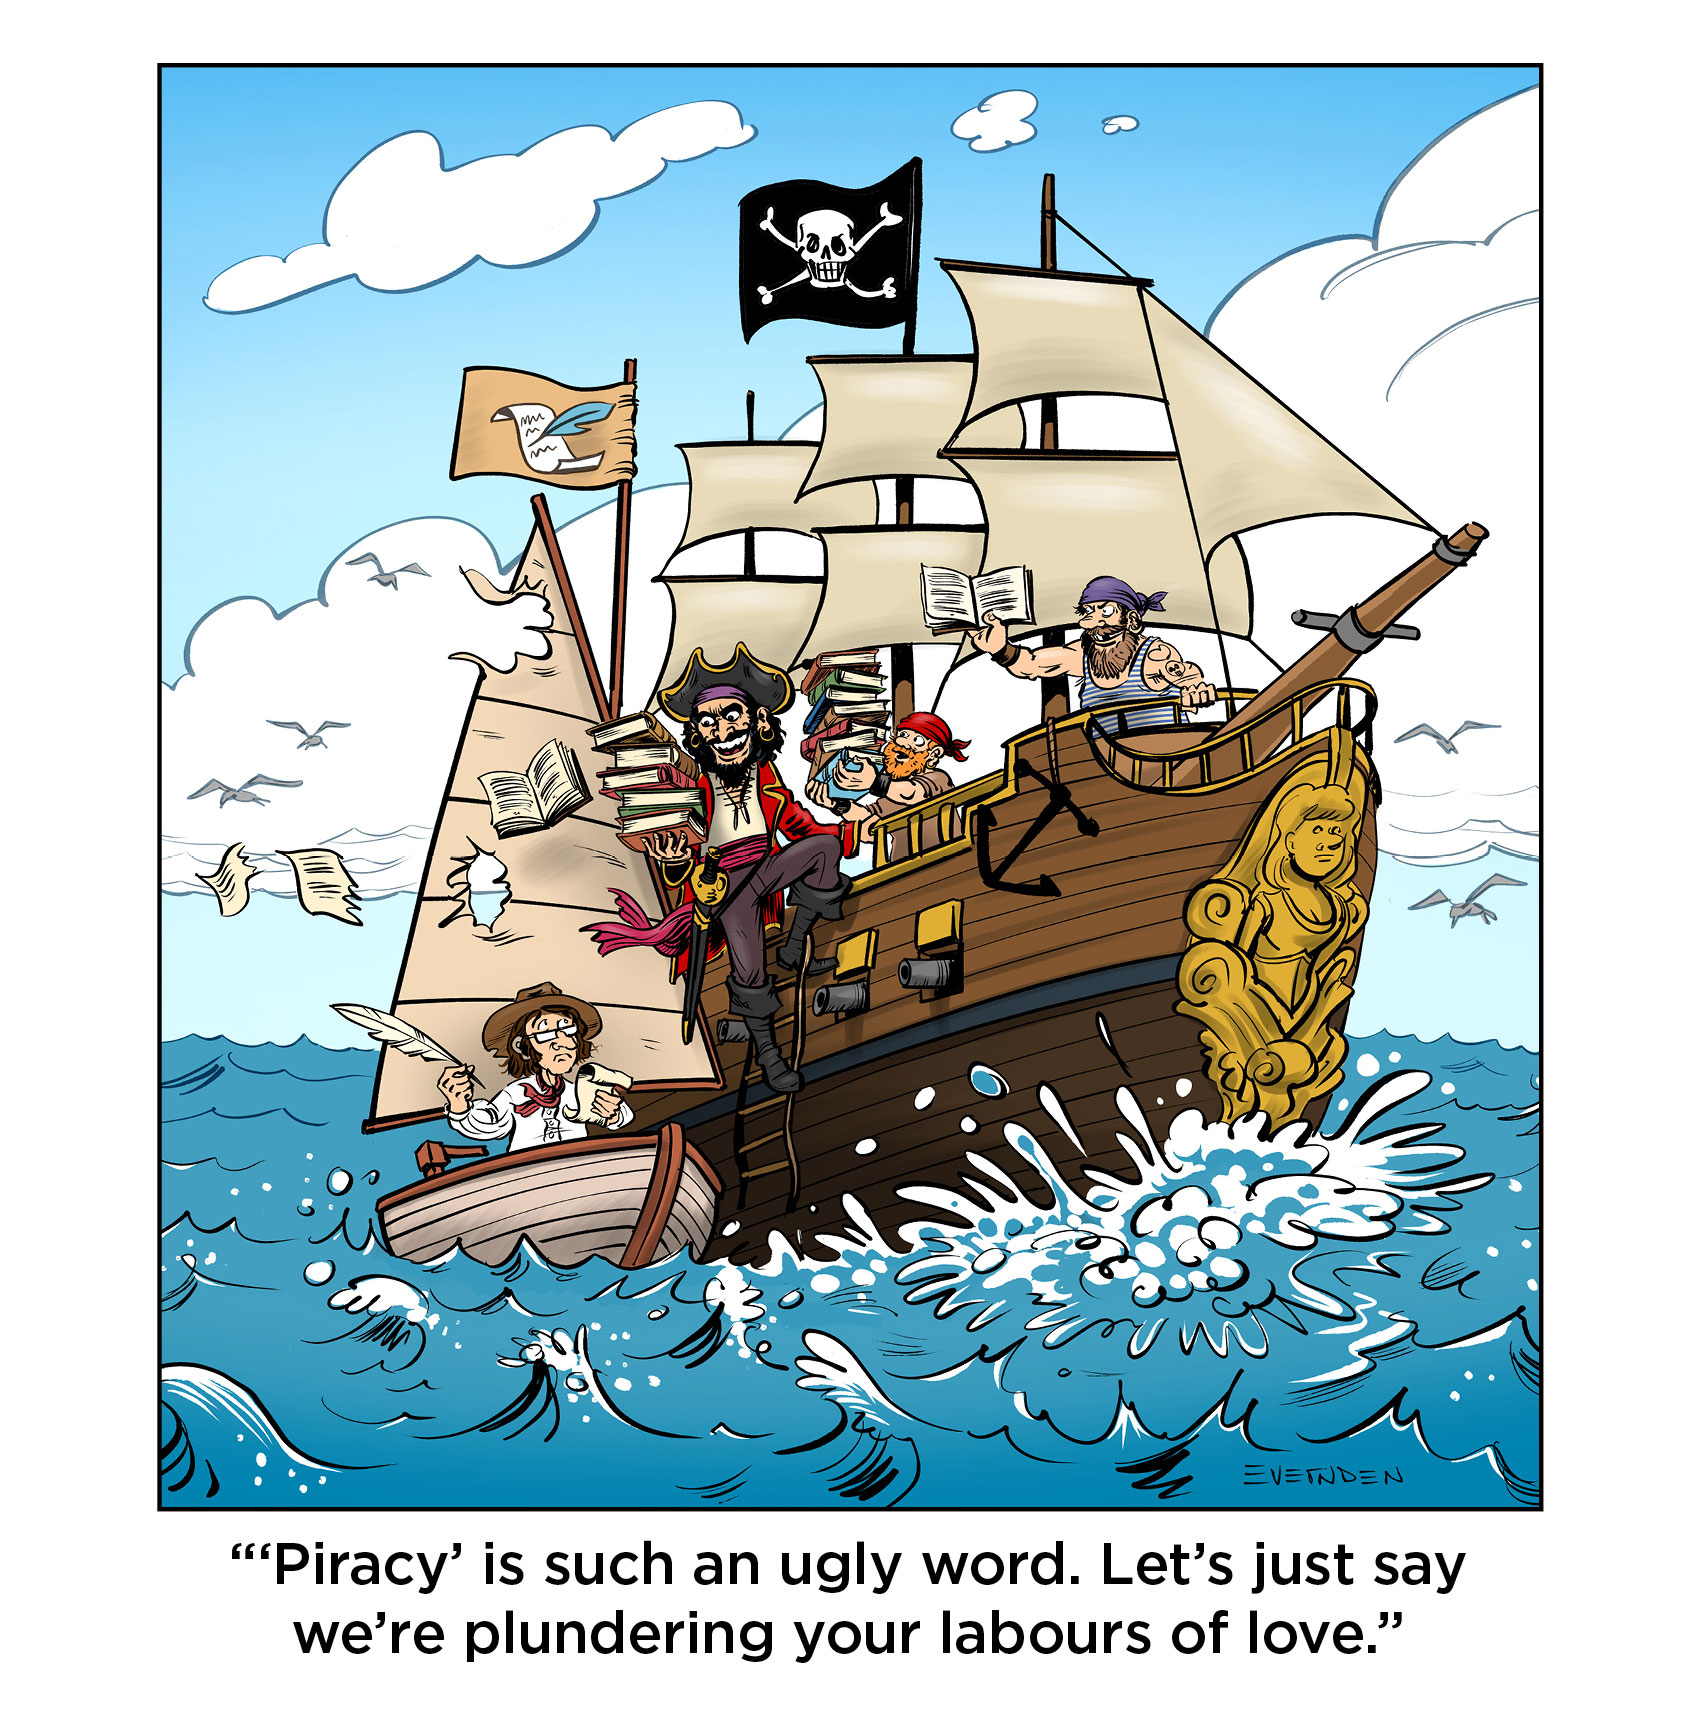 Editorial Cartoon by Derek Evernden: "'Piracy' is such an ugly word. Let's just say we're plundering your labours of love."